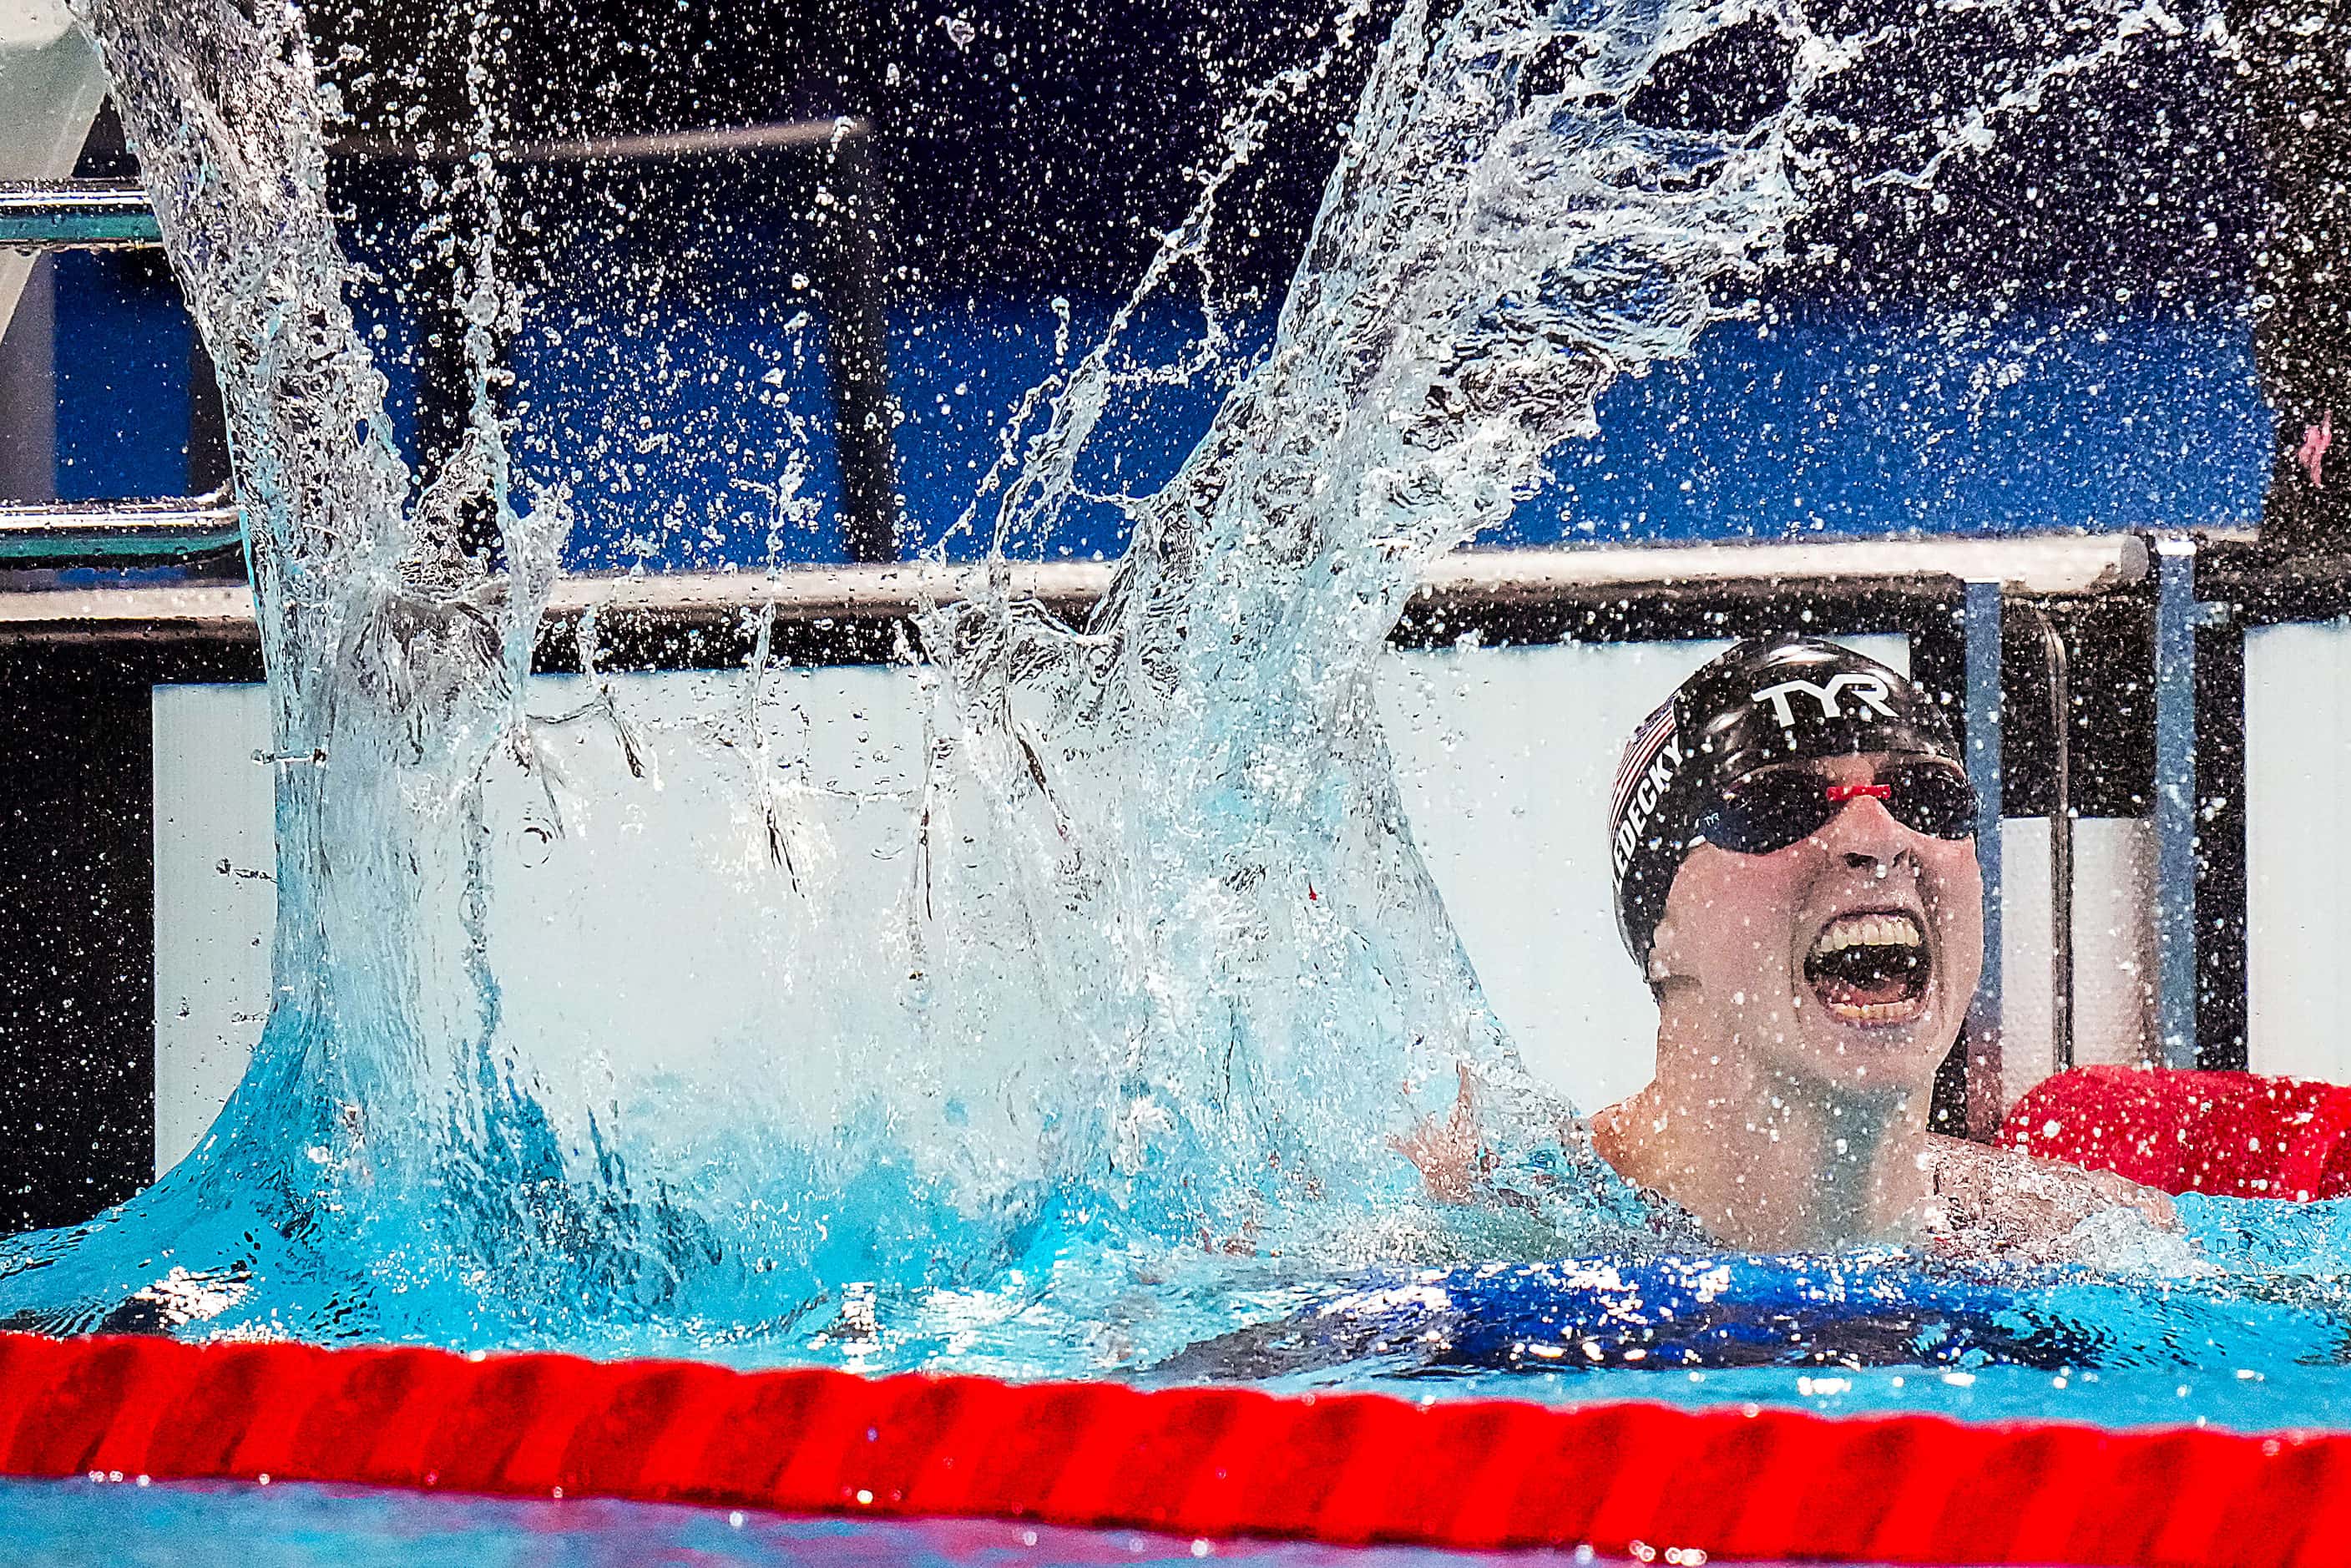 Katie Ledecky of the United States celebrates after winning the women's 1500-meter freestyle...